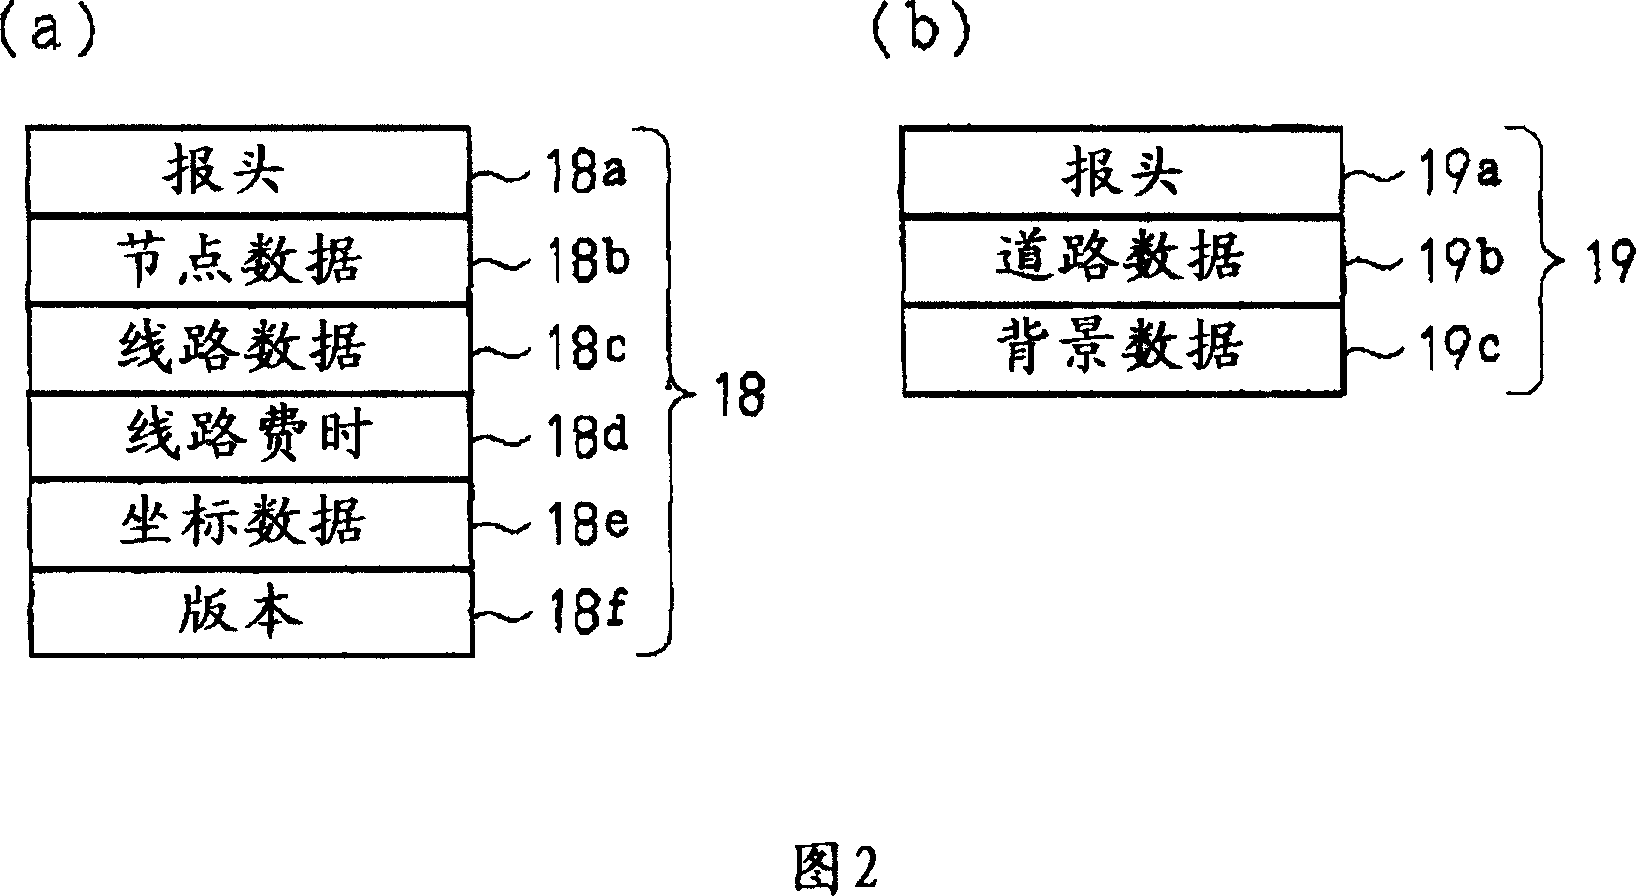 Route search method, route guidance system, navigation system, and statistical processing server